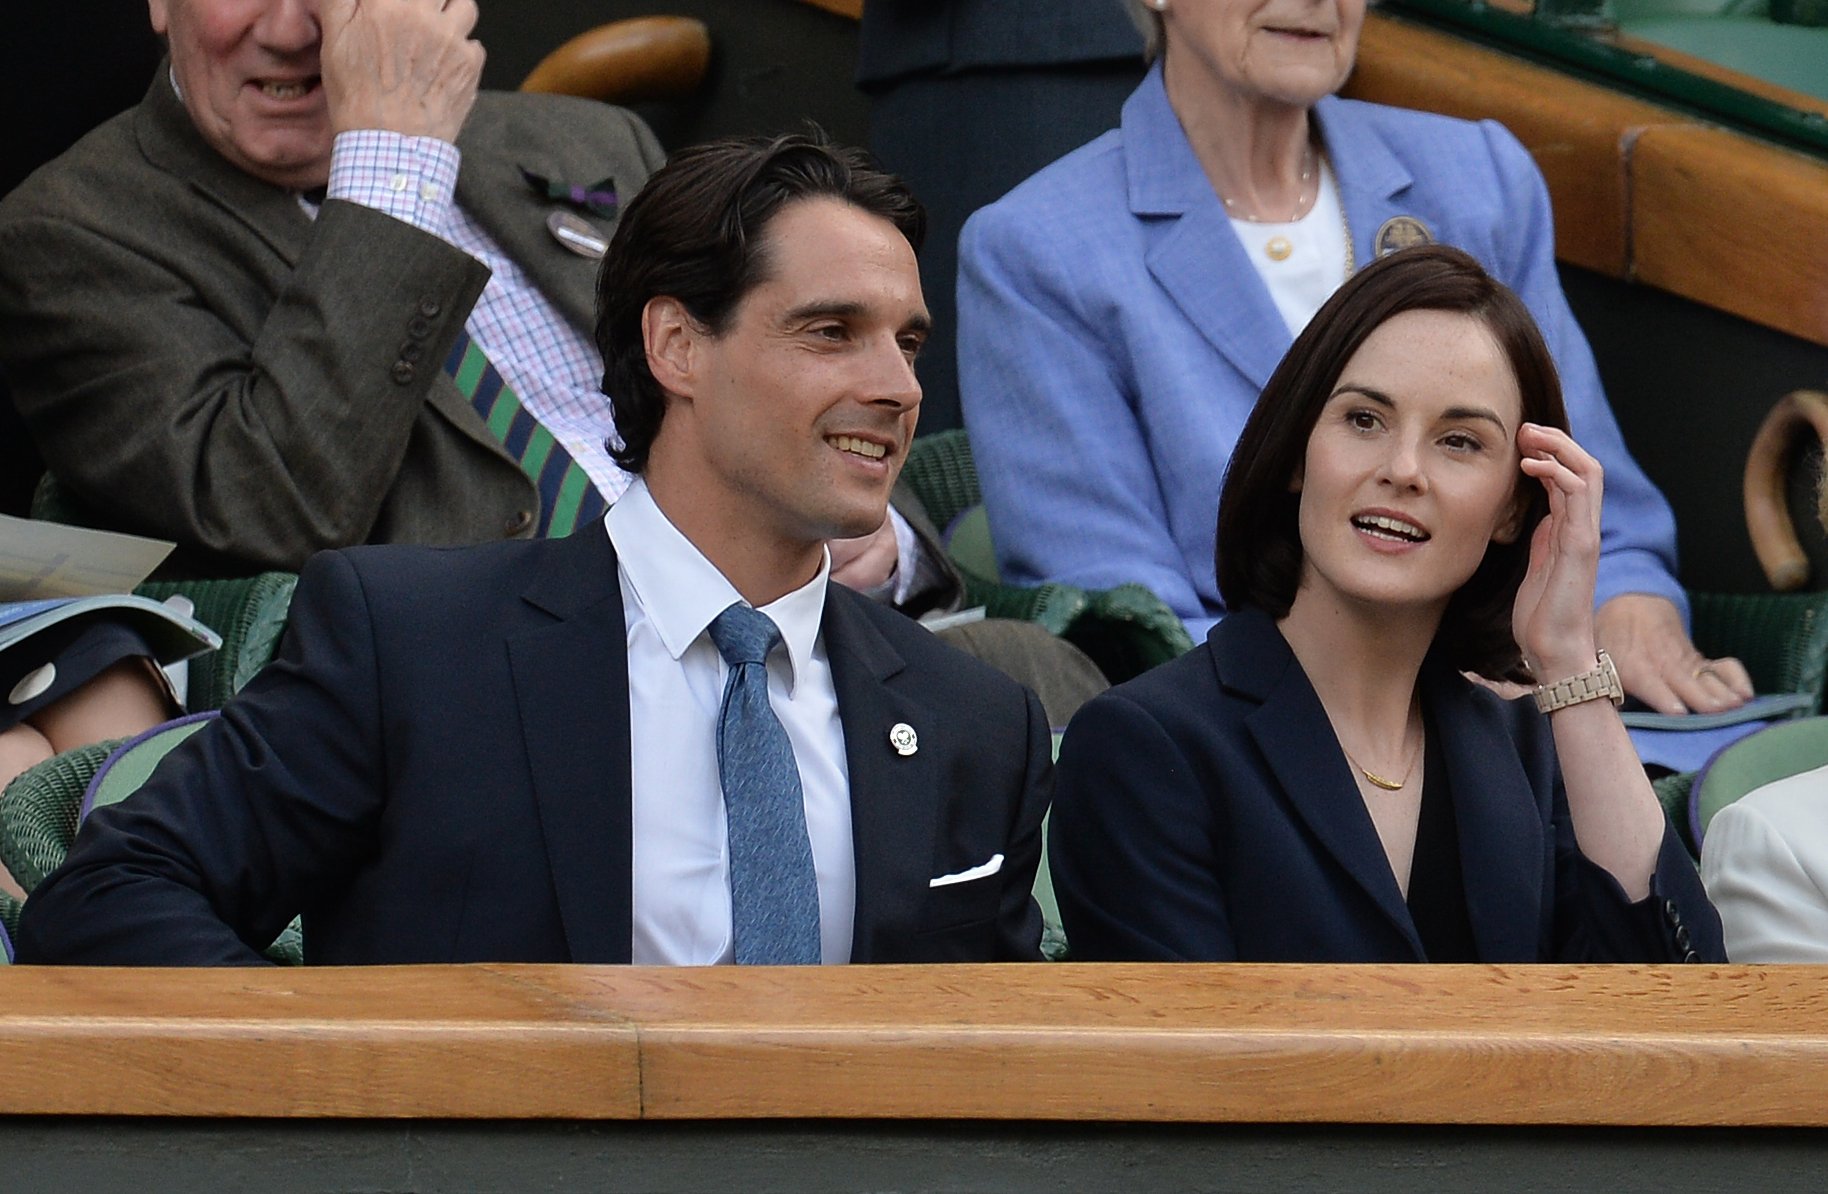 Michelle Dockery and John Dineen at the Lukas Rosol v Rafael Nadal match on centre court at Wimbledon on June 26, 2014 | Source: Getty Images